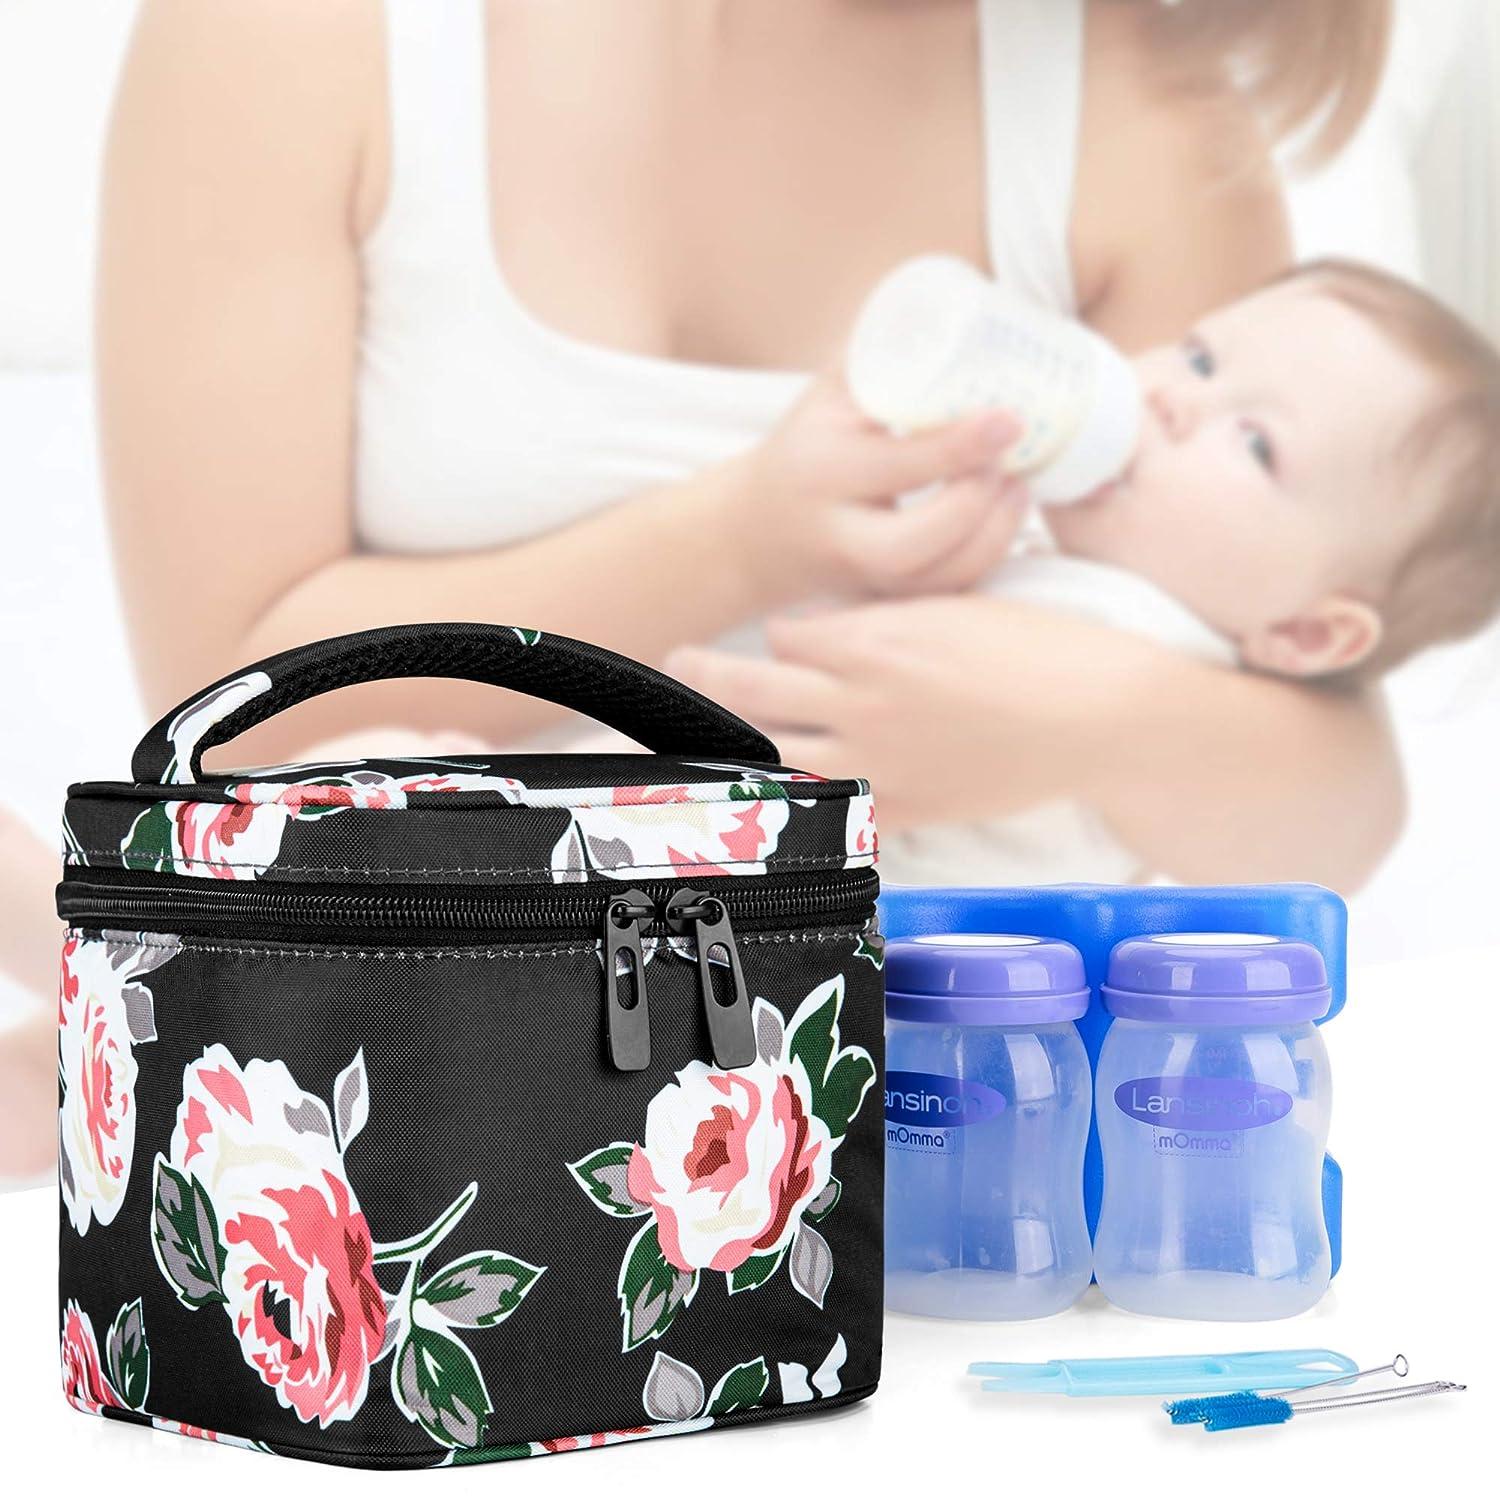 Breastmilk Cooler Bag, Double Layer, Fits 6 Bottles, Up to 9 oz for  Breastfeeding Breast Pump Pump